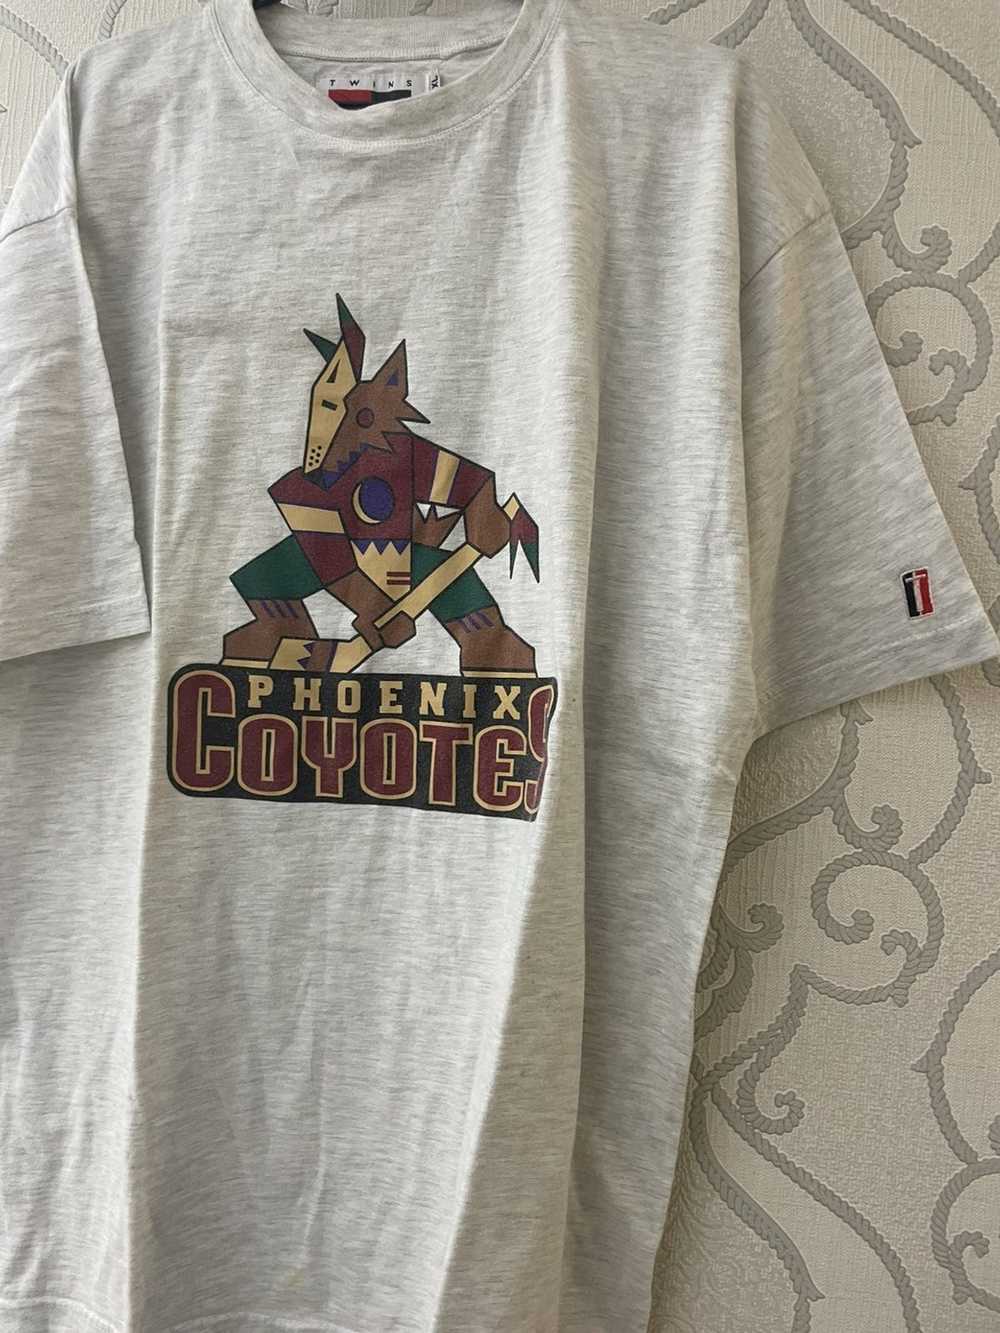 CD24 Design on Instagram: “Kicking off the Central Division with the Arizona  Coyotes “City Edition 2.0” concept, thoughts?…